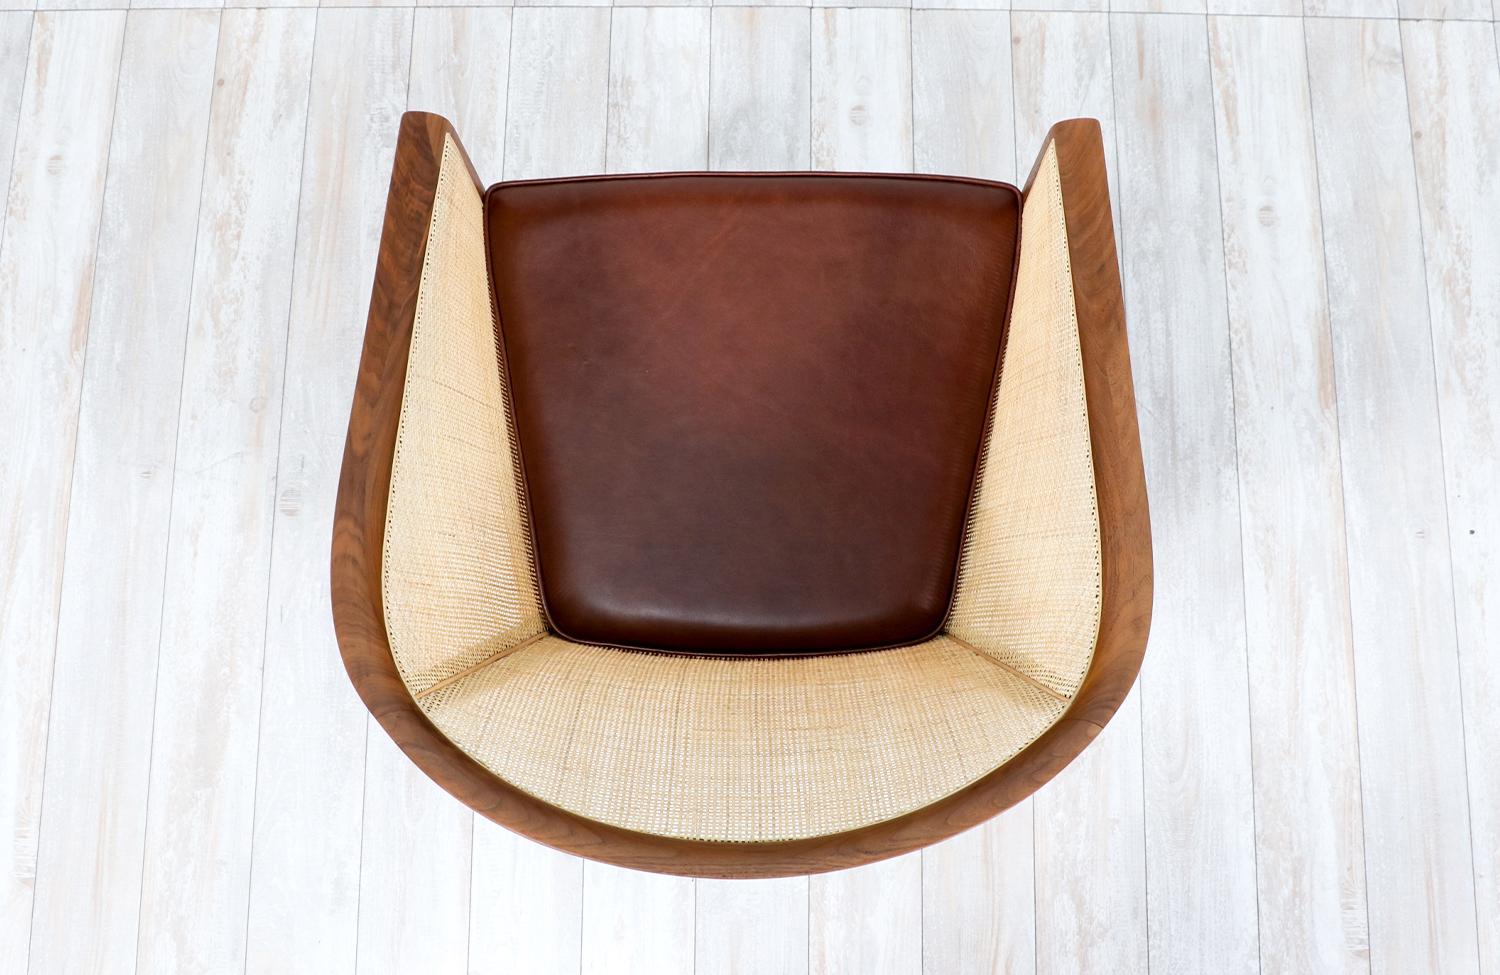  Expertly Restored - Kipp Stewart Walnut & Cane Lounge Chair for Directional  3